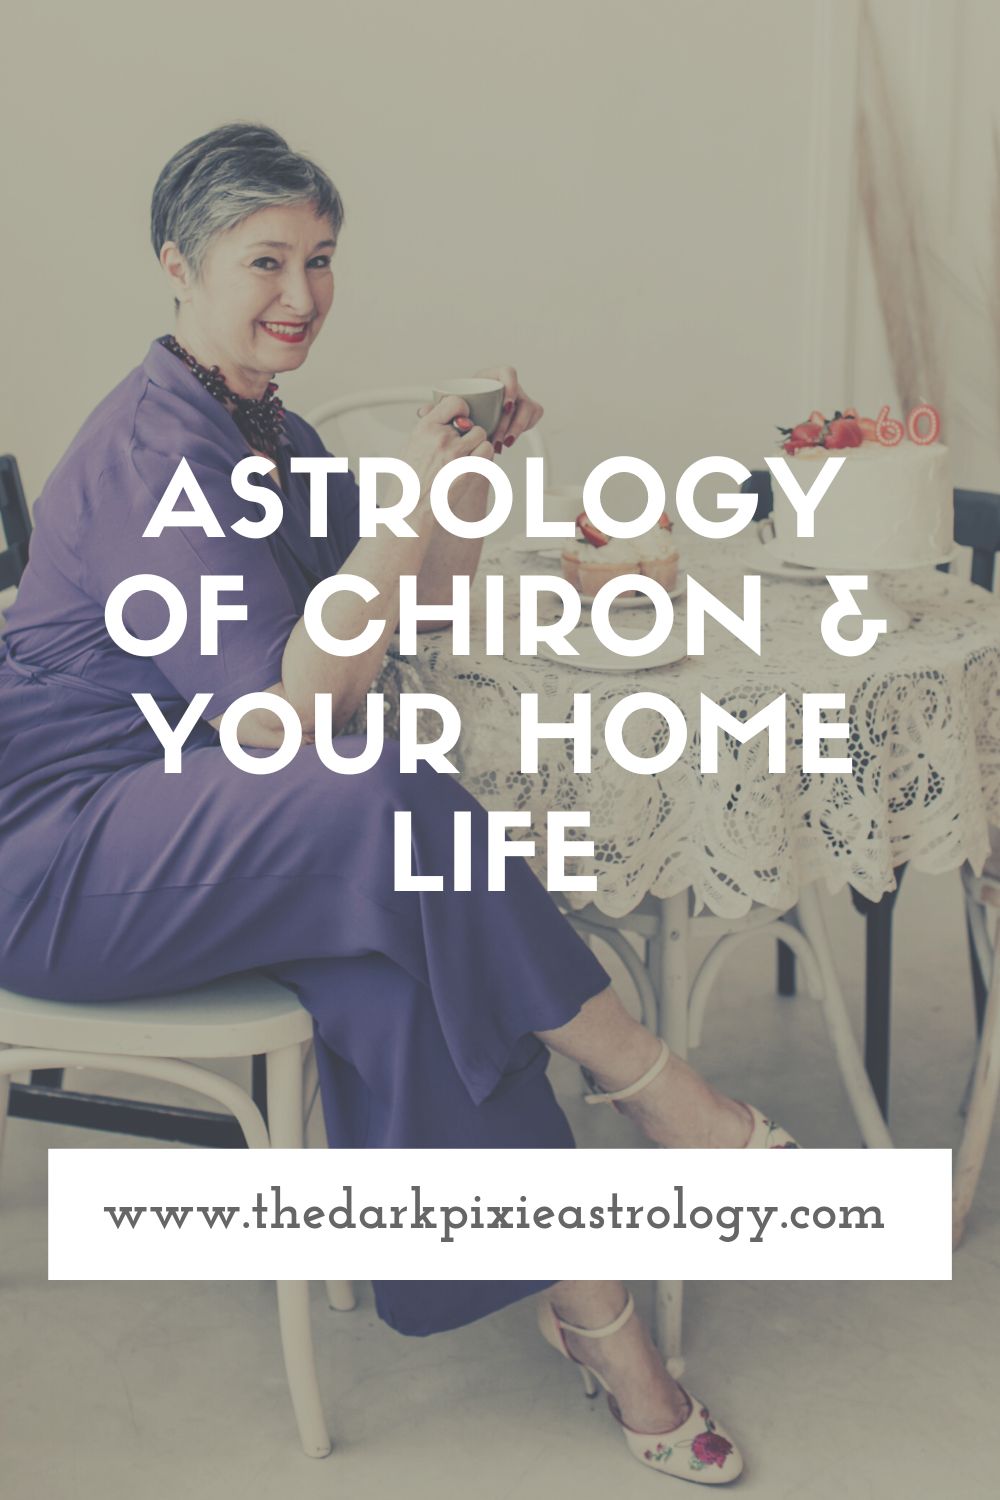 Astrology of Chiron & Your Home Life - The Dark Pixie Astrology